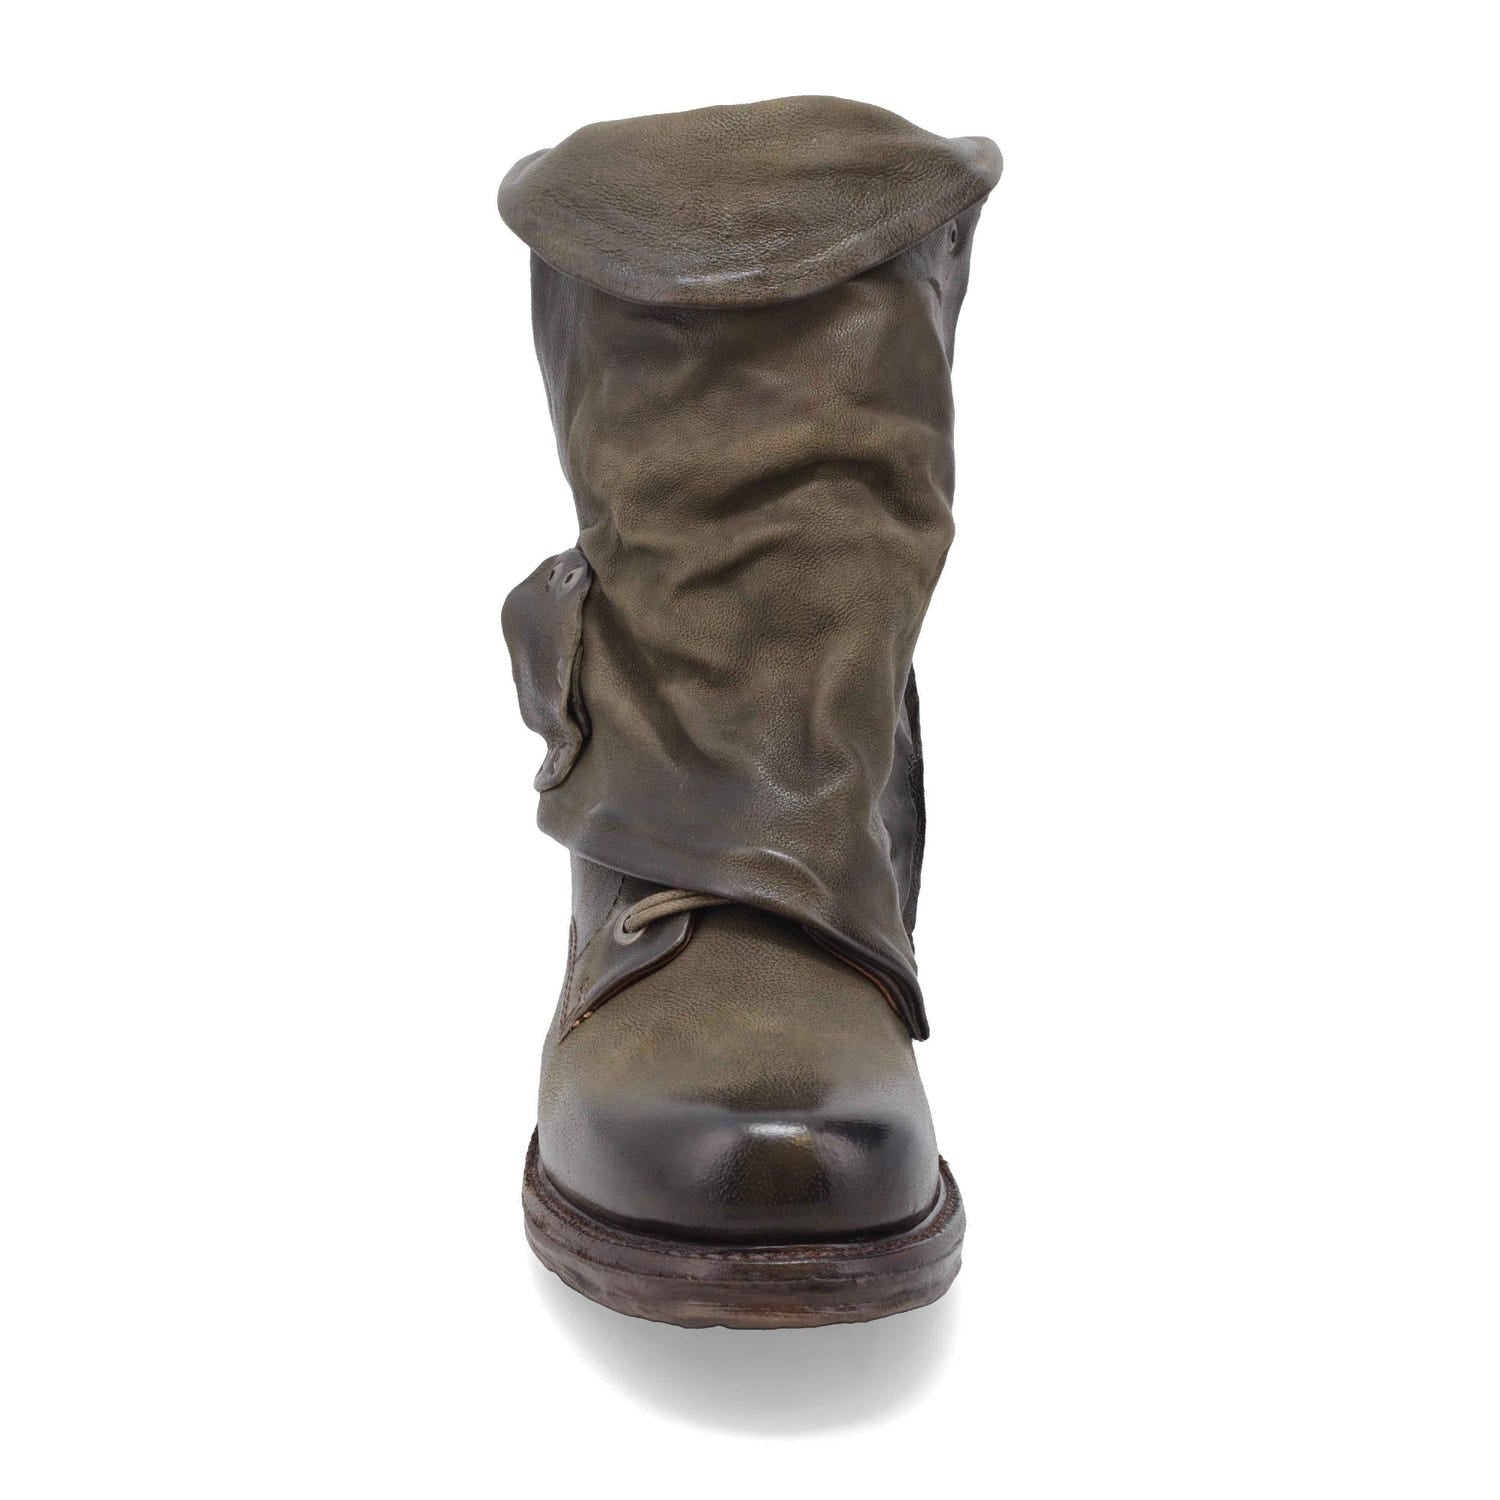 Front view of the emerson boot in jungle (olive). This boot has a lace up front with a leather overlay that's secured with a buckle.